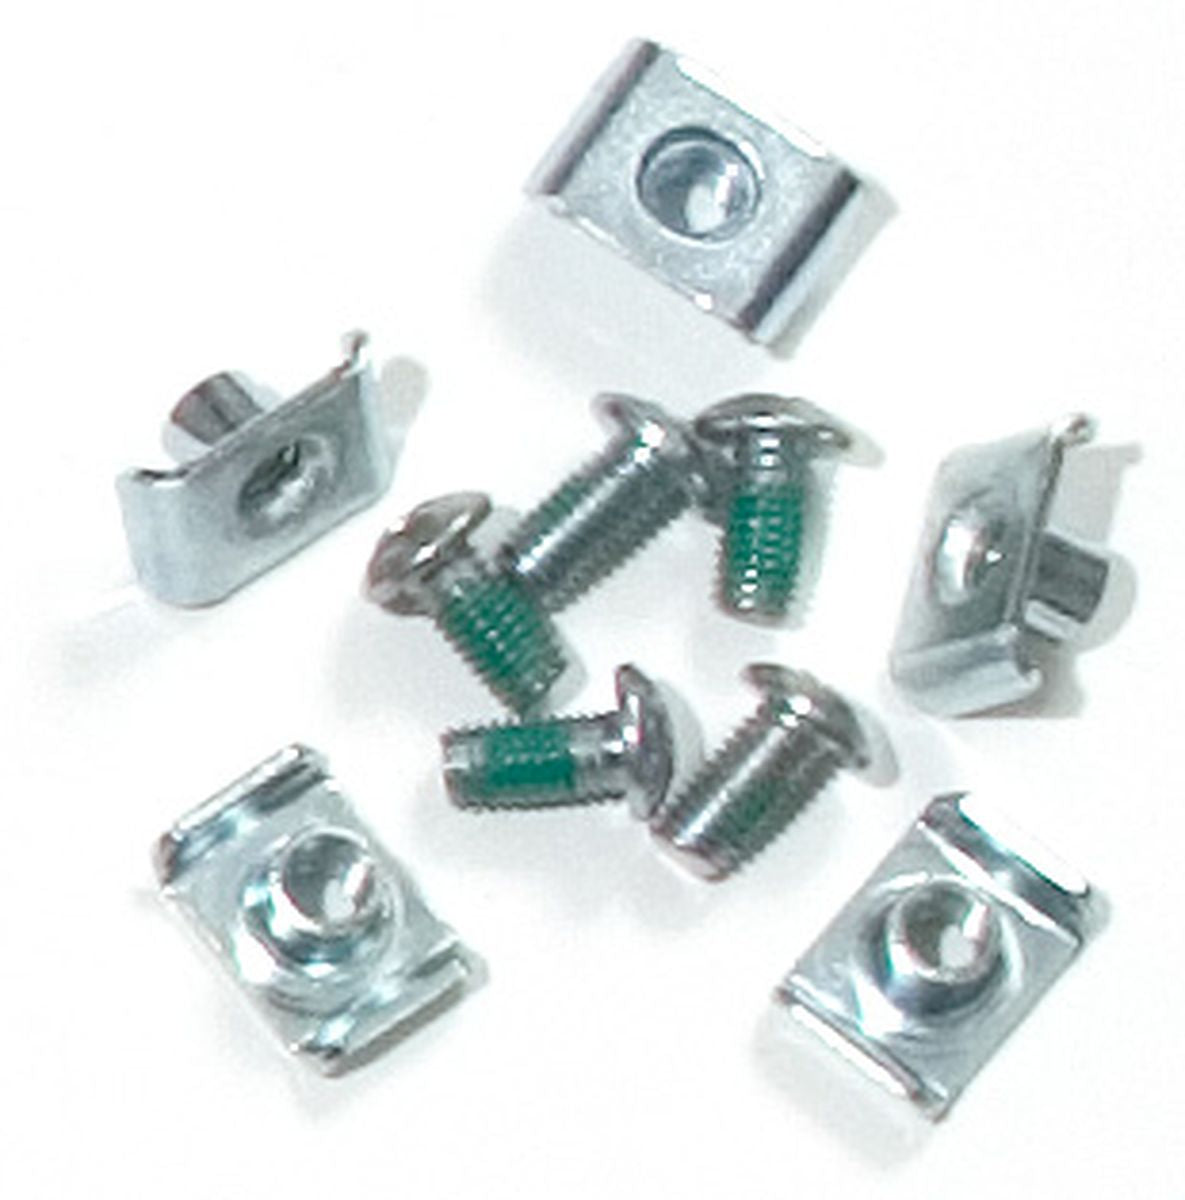 QL1 screw set for 4 and 5-hole brackets